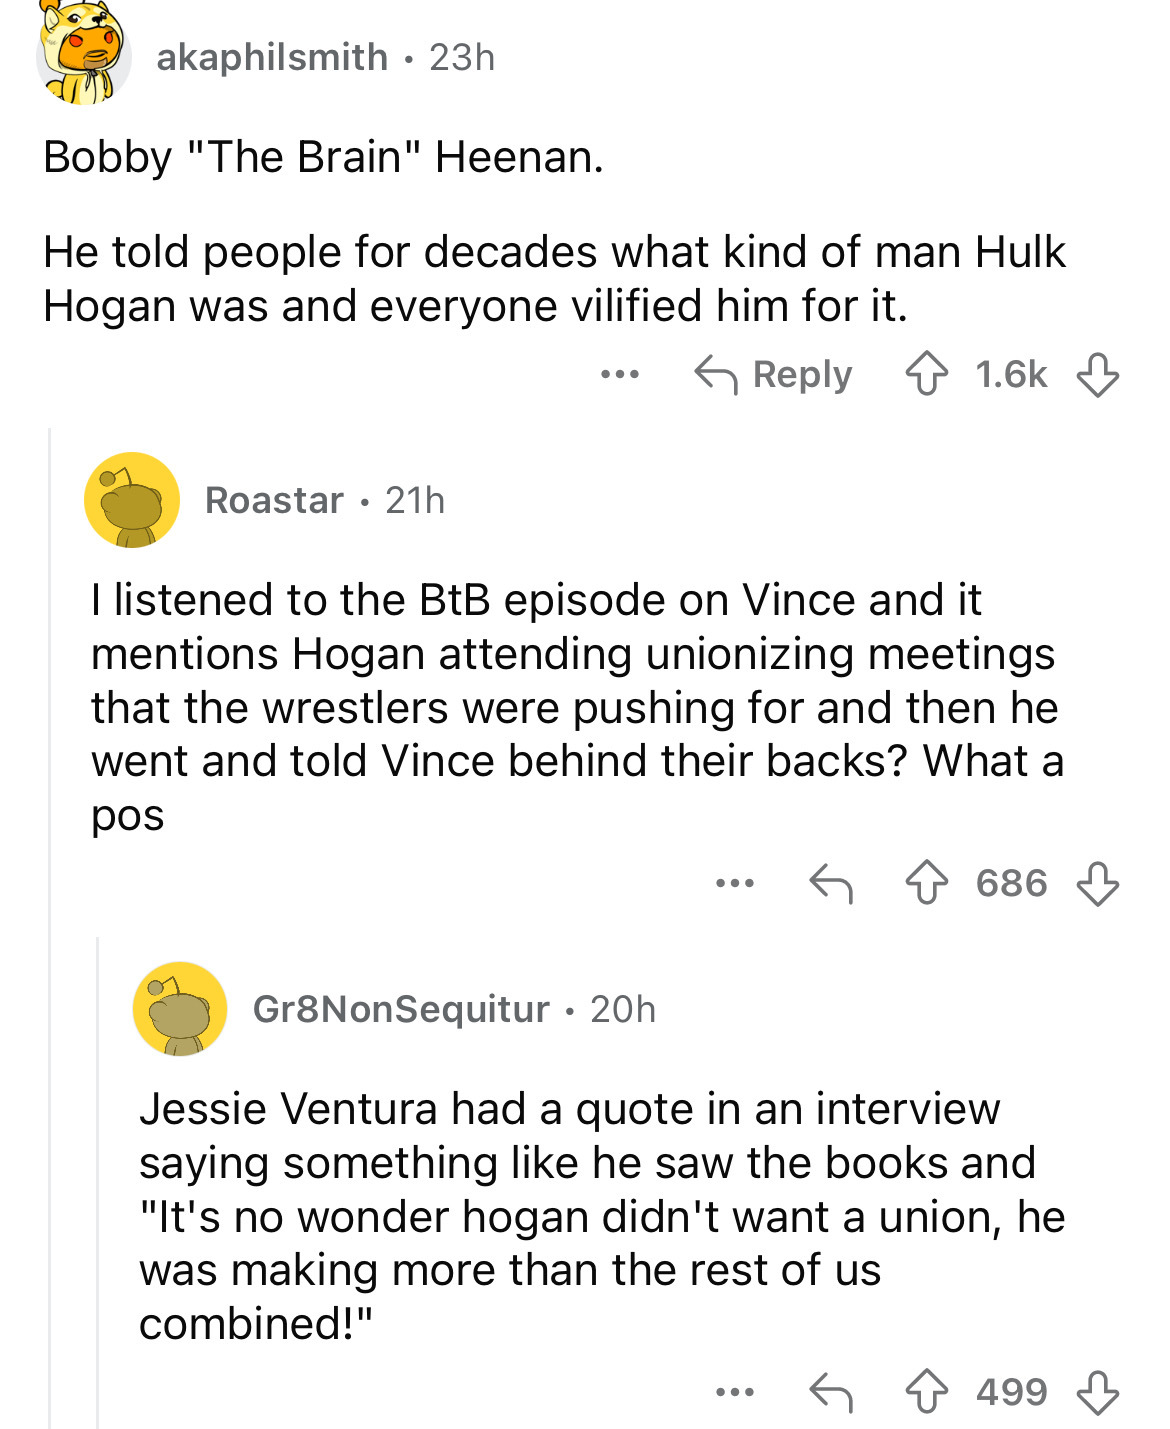 document - akaphilsmith 23h Bobby "The Brain" Heenan. He told people for decades what kind of man Hulk Hogan was and everyone vilified him for it. Roastar 21h I listened to the BtB episode on Vince and it mentions Hogan attending unionizing meetings that 